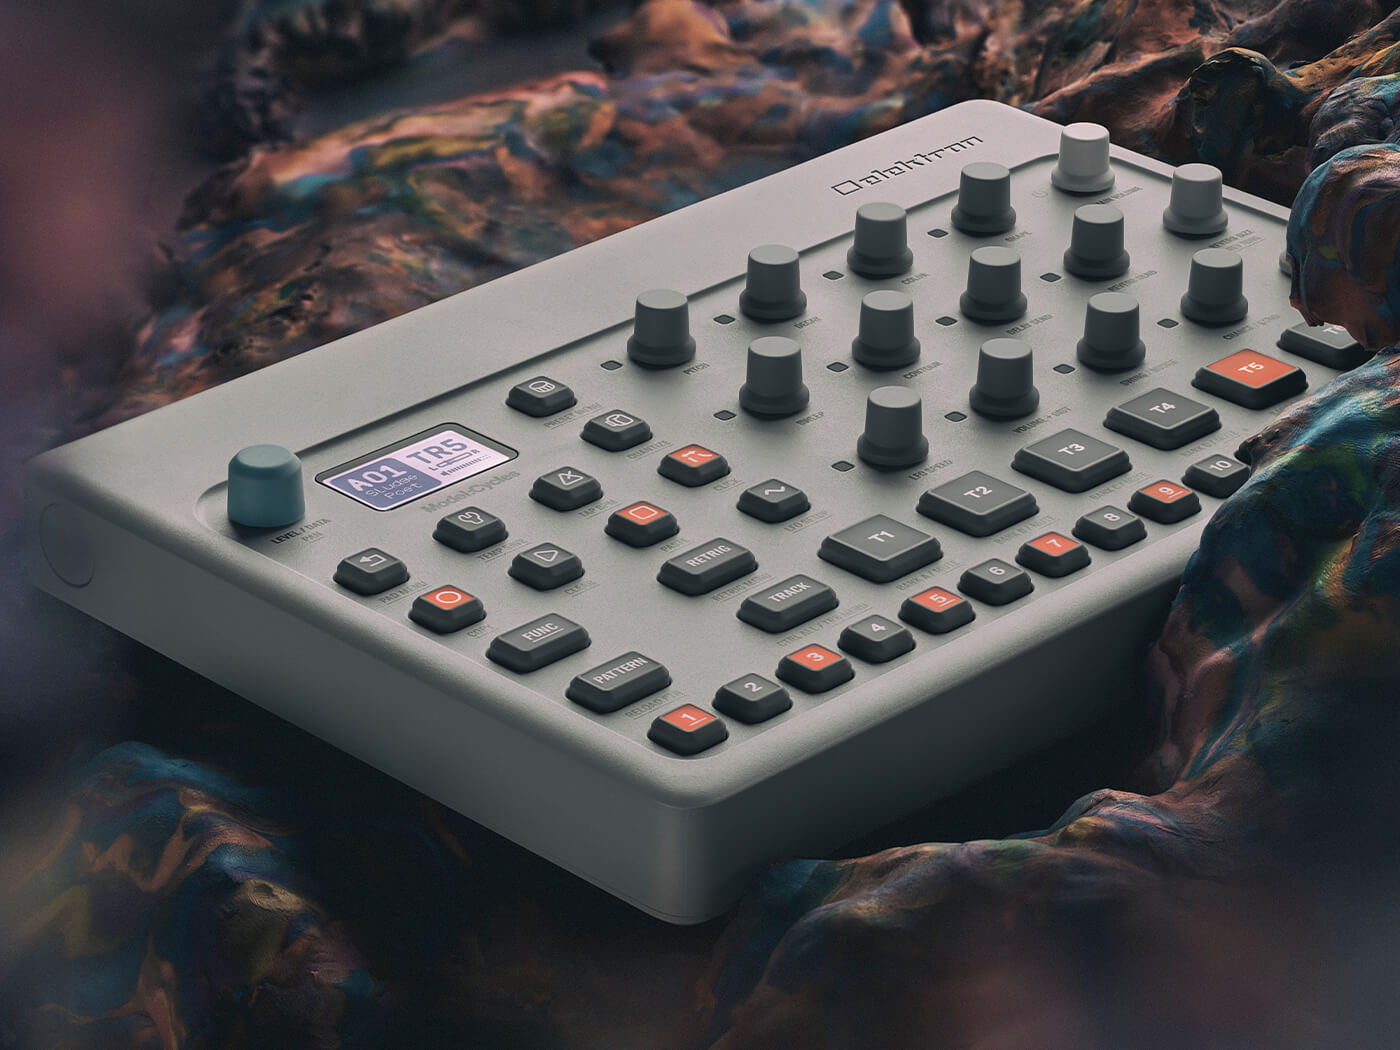 Elektron Model: Cycles is a comprehensive groovebox with six FM synths